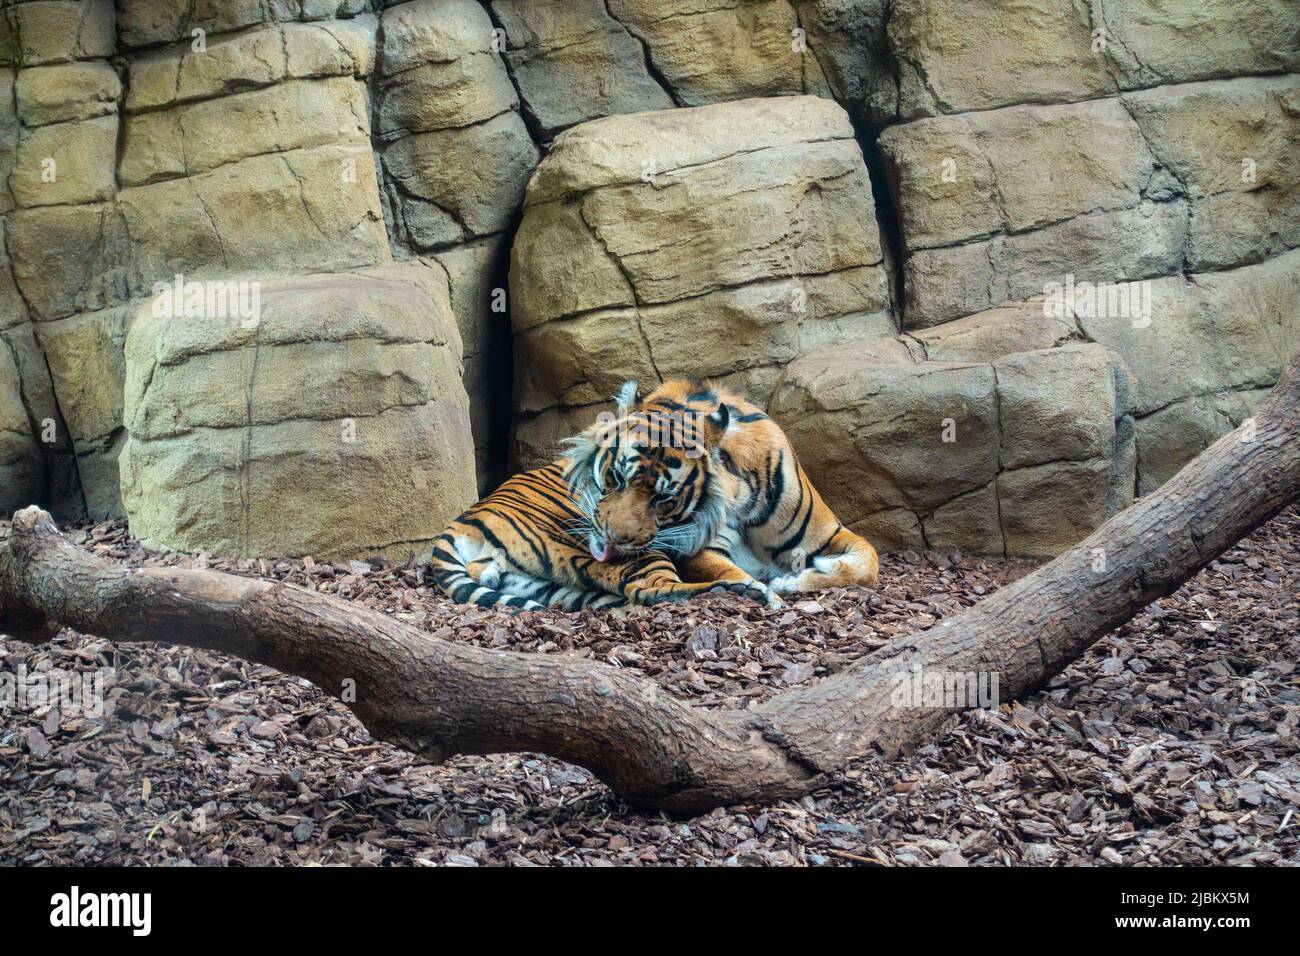 A tiger in its indoor enclosure at London Zoo. Stock Photo